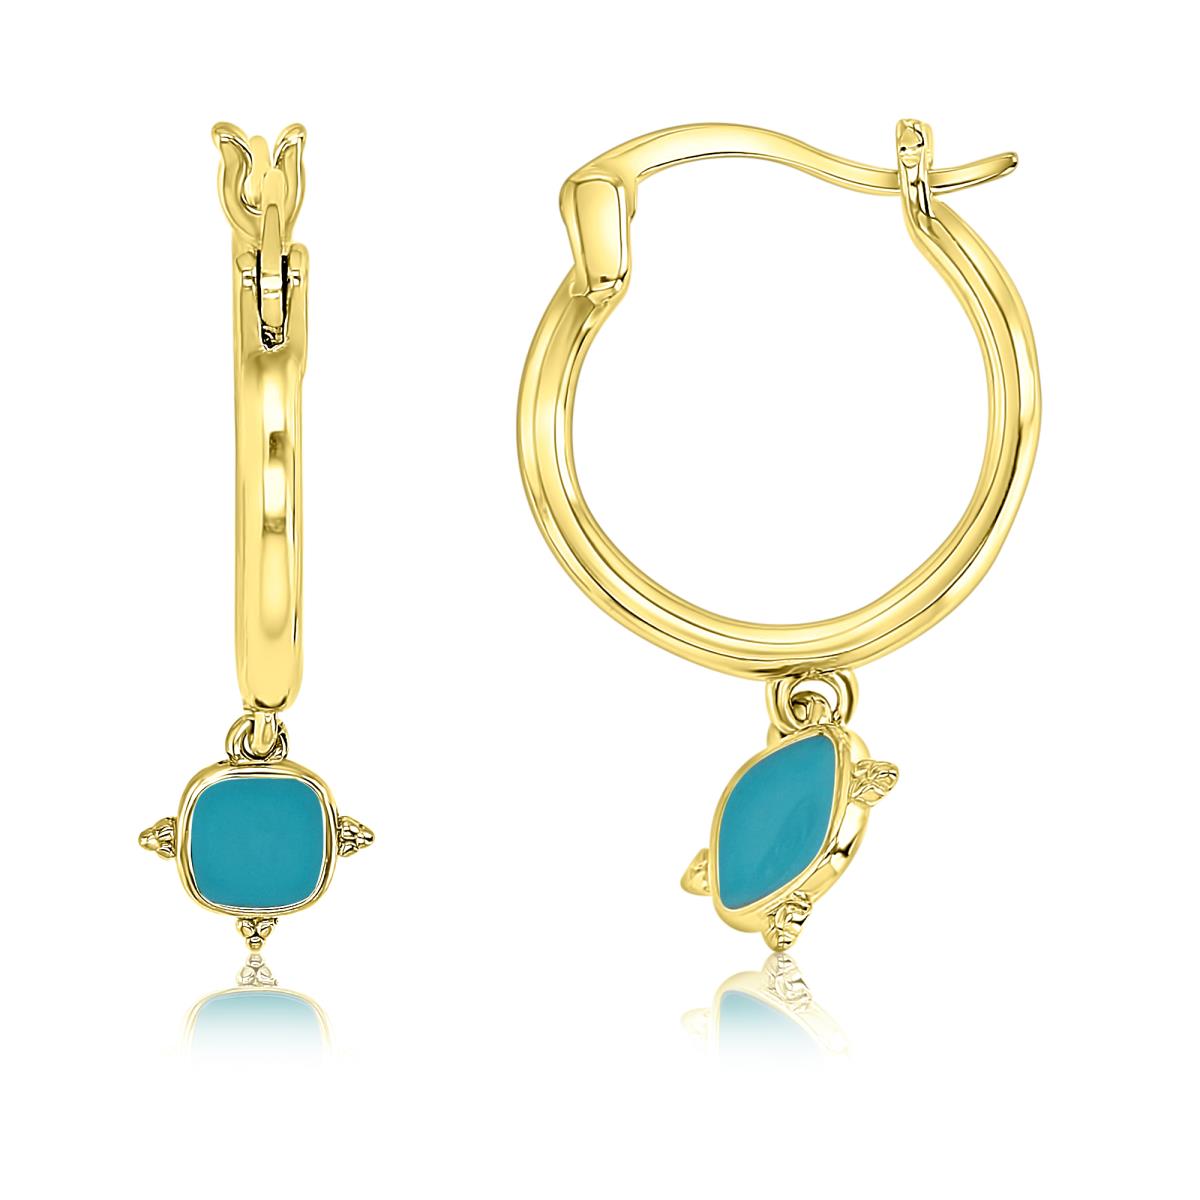 Sterling Silver Yellow 25X8MM Polished Teal Enamel Square Dangling Hoop Earring